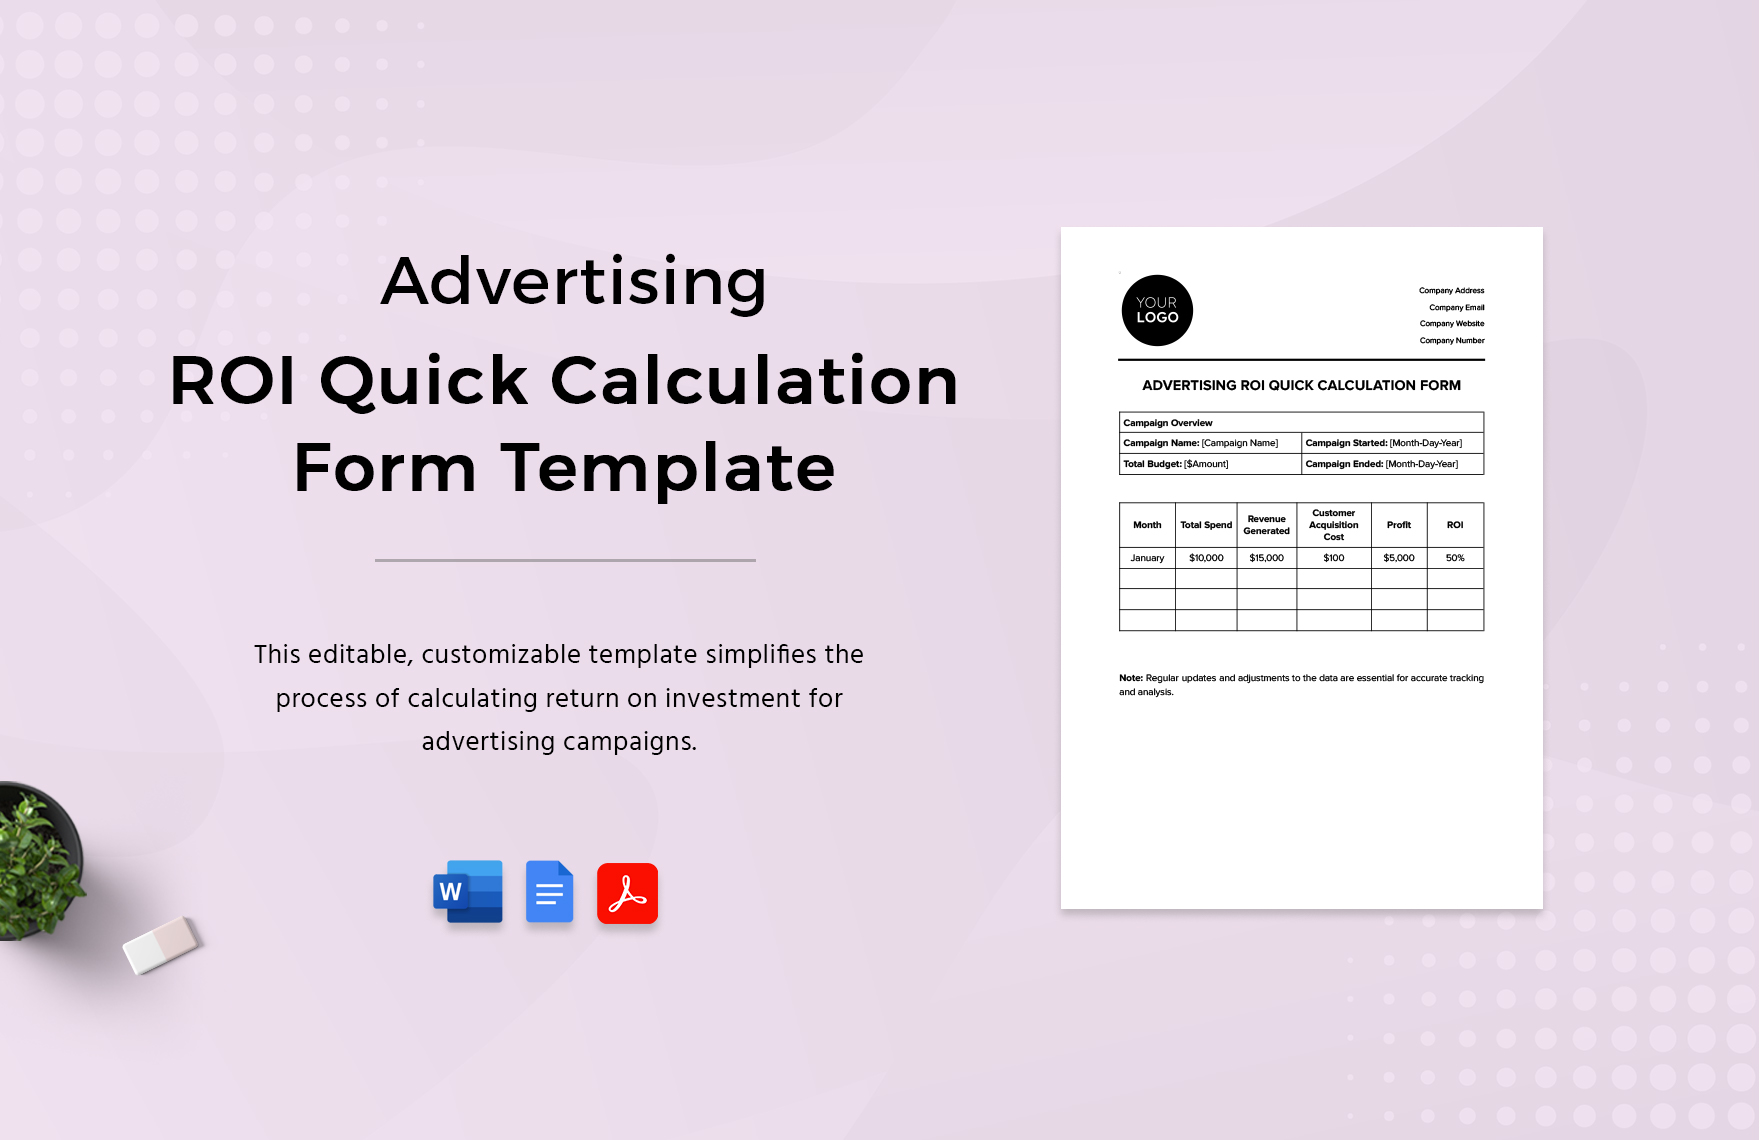 Advertising ROI Quick Calculation Form Template